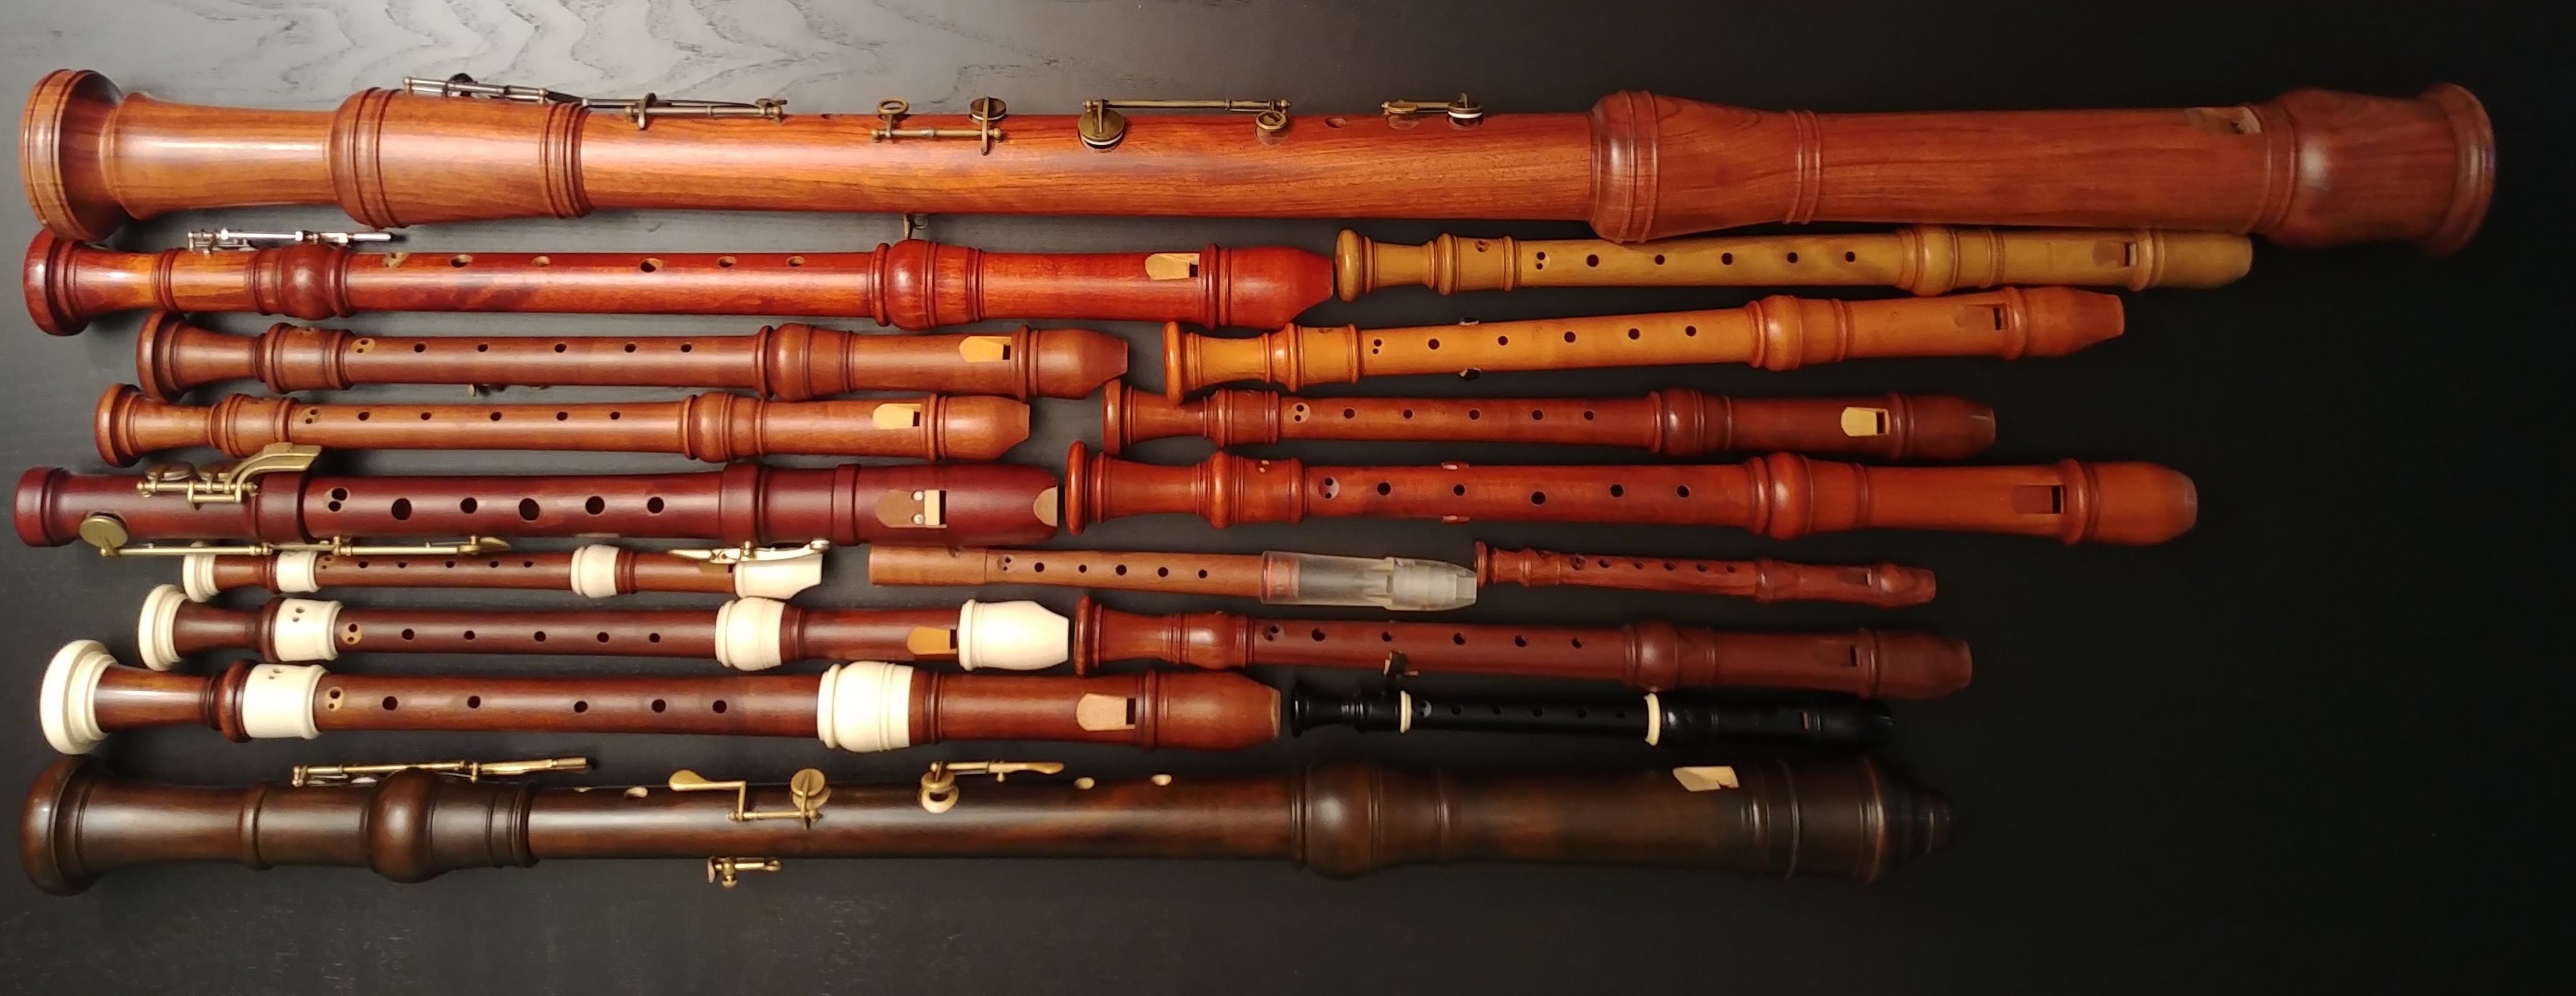 Recorder collection